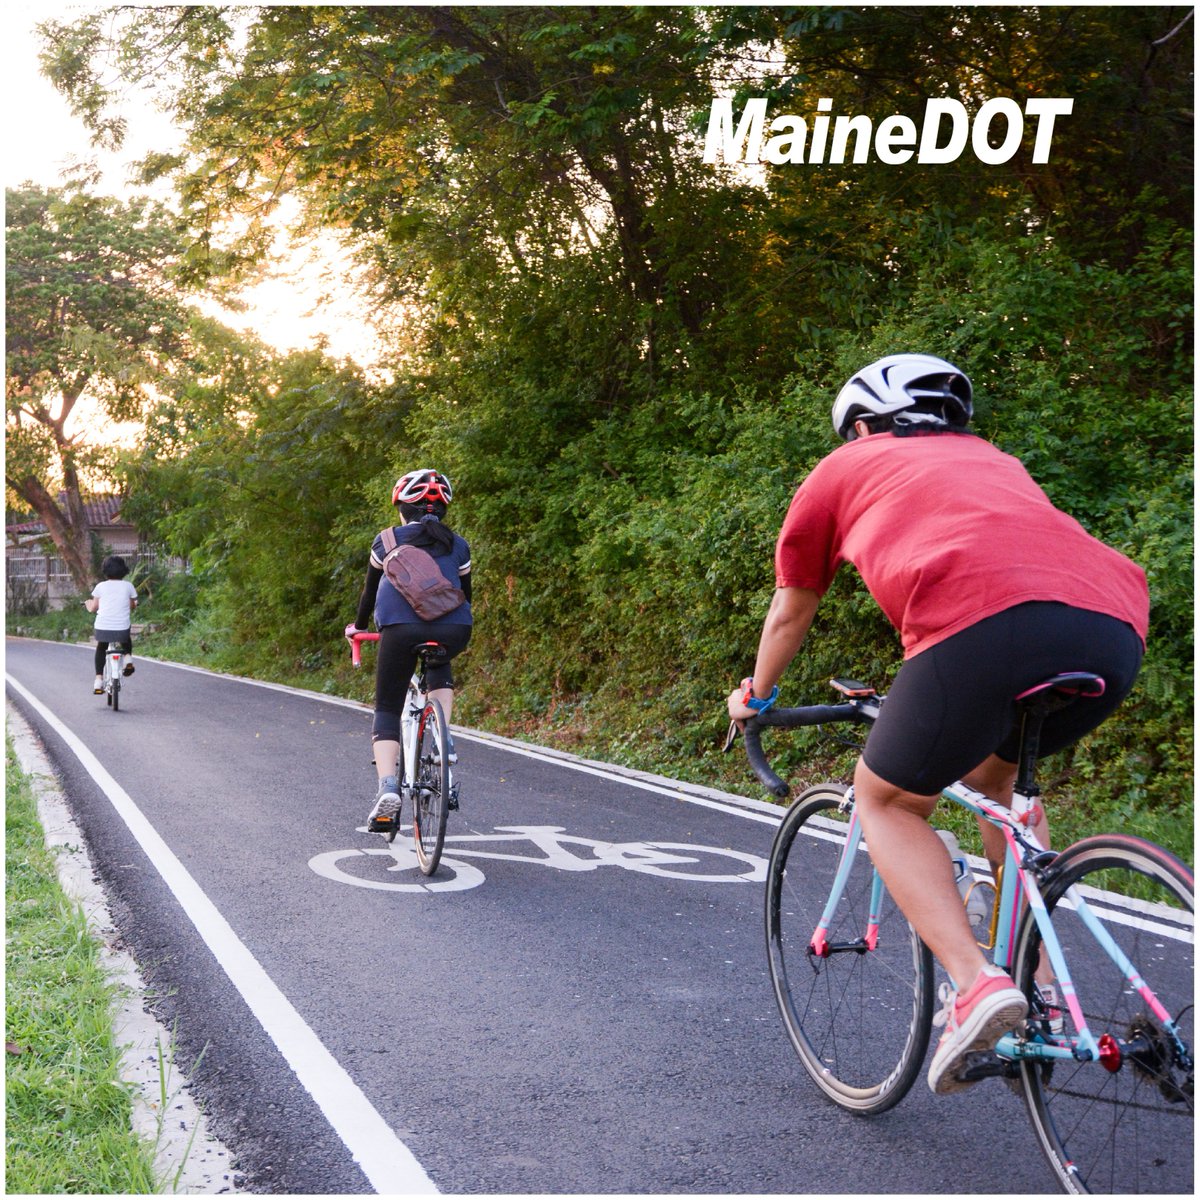 National Bike Month, held each May, is a great time to welcome summer with a healthy activity. Cycling combines fitness, fun, and environmental awareness. It enhances personal health and well-being while reducing carbon footprints.